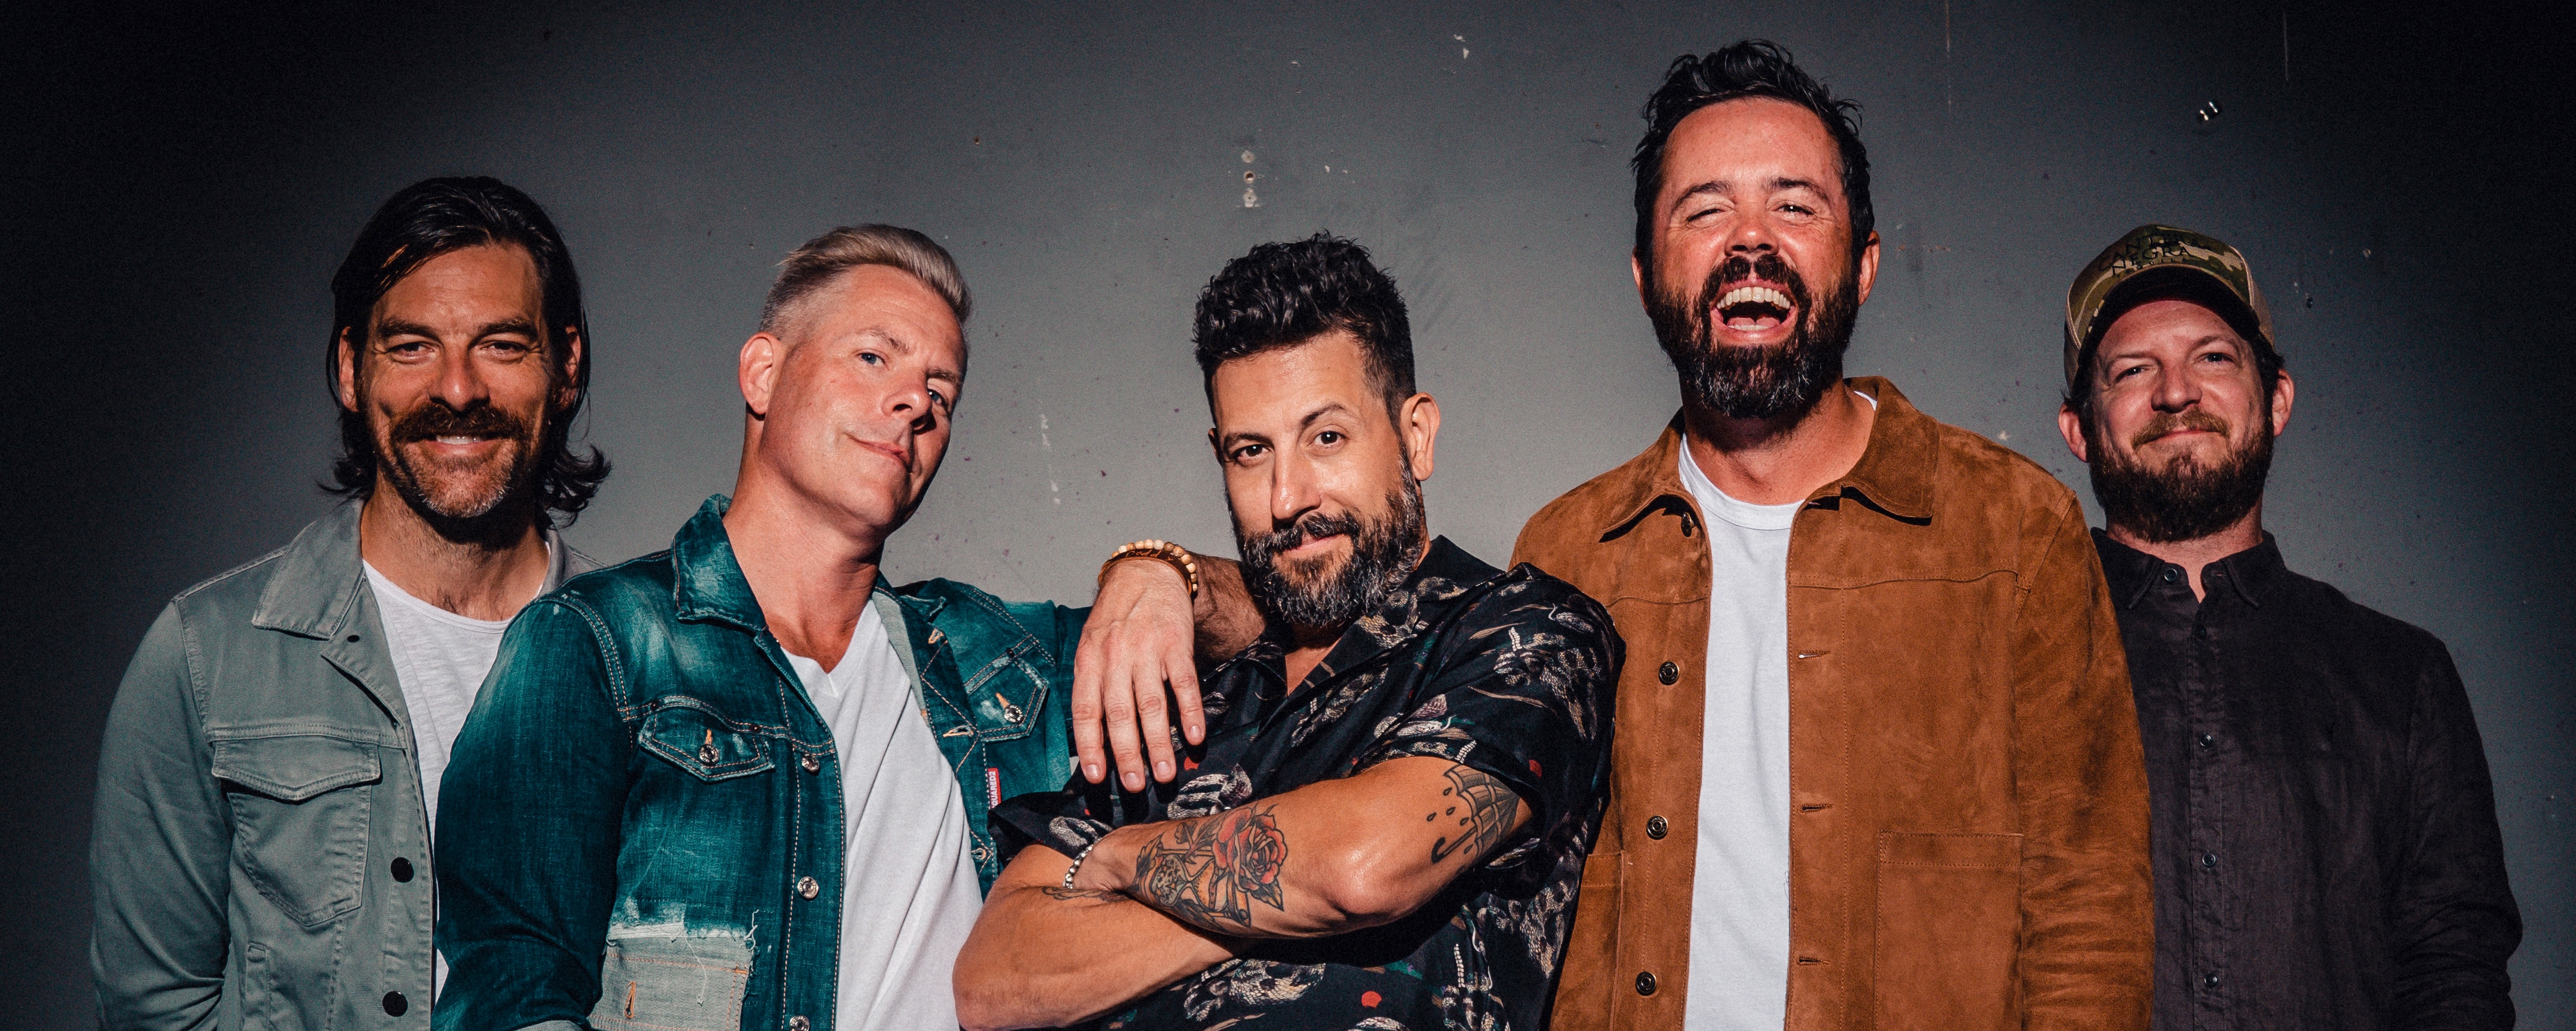 LISTEN: Old Dominion Shares Snippet of Unreleased Song from Forthcoming EP